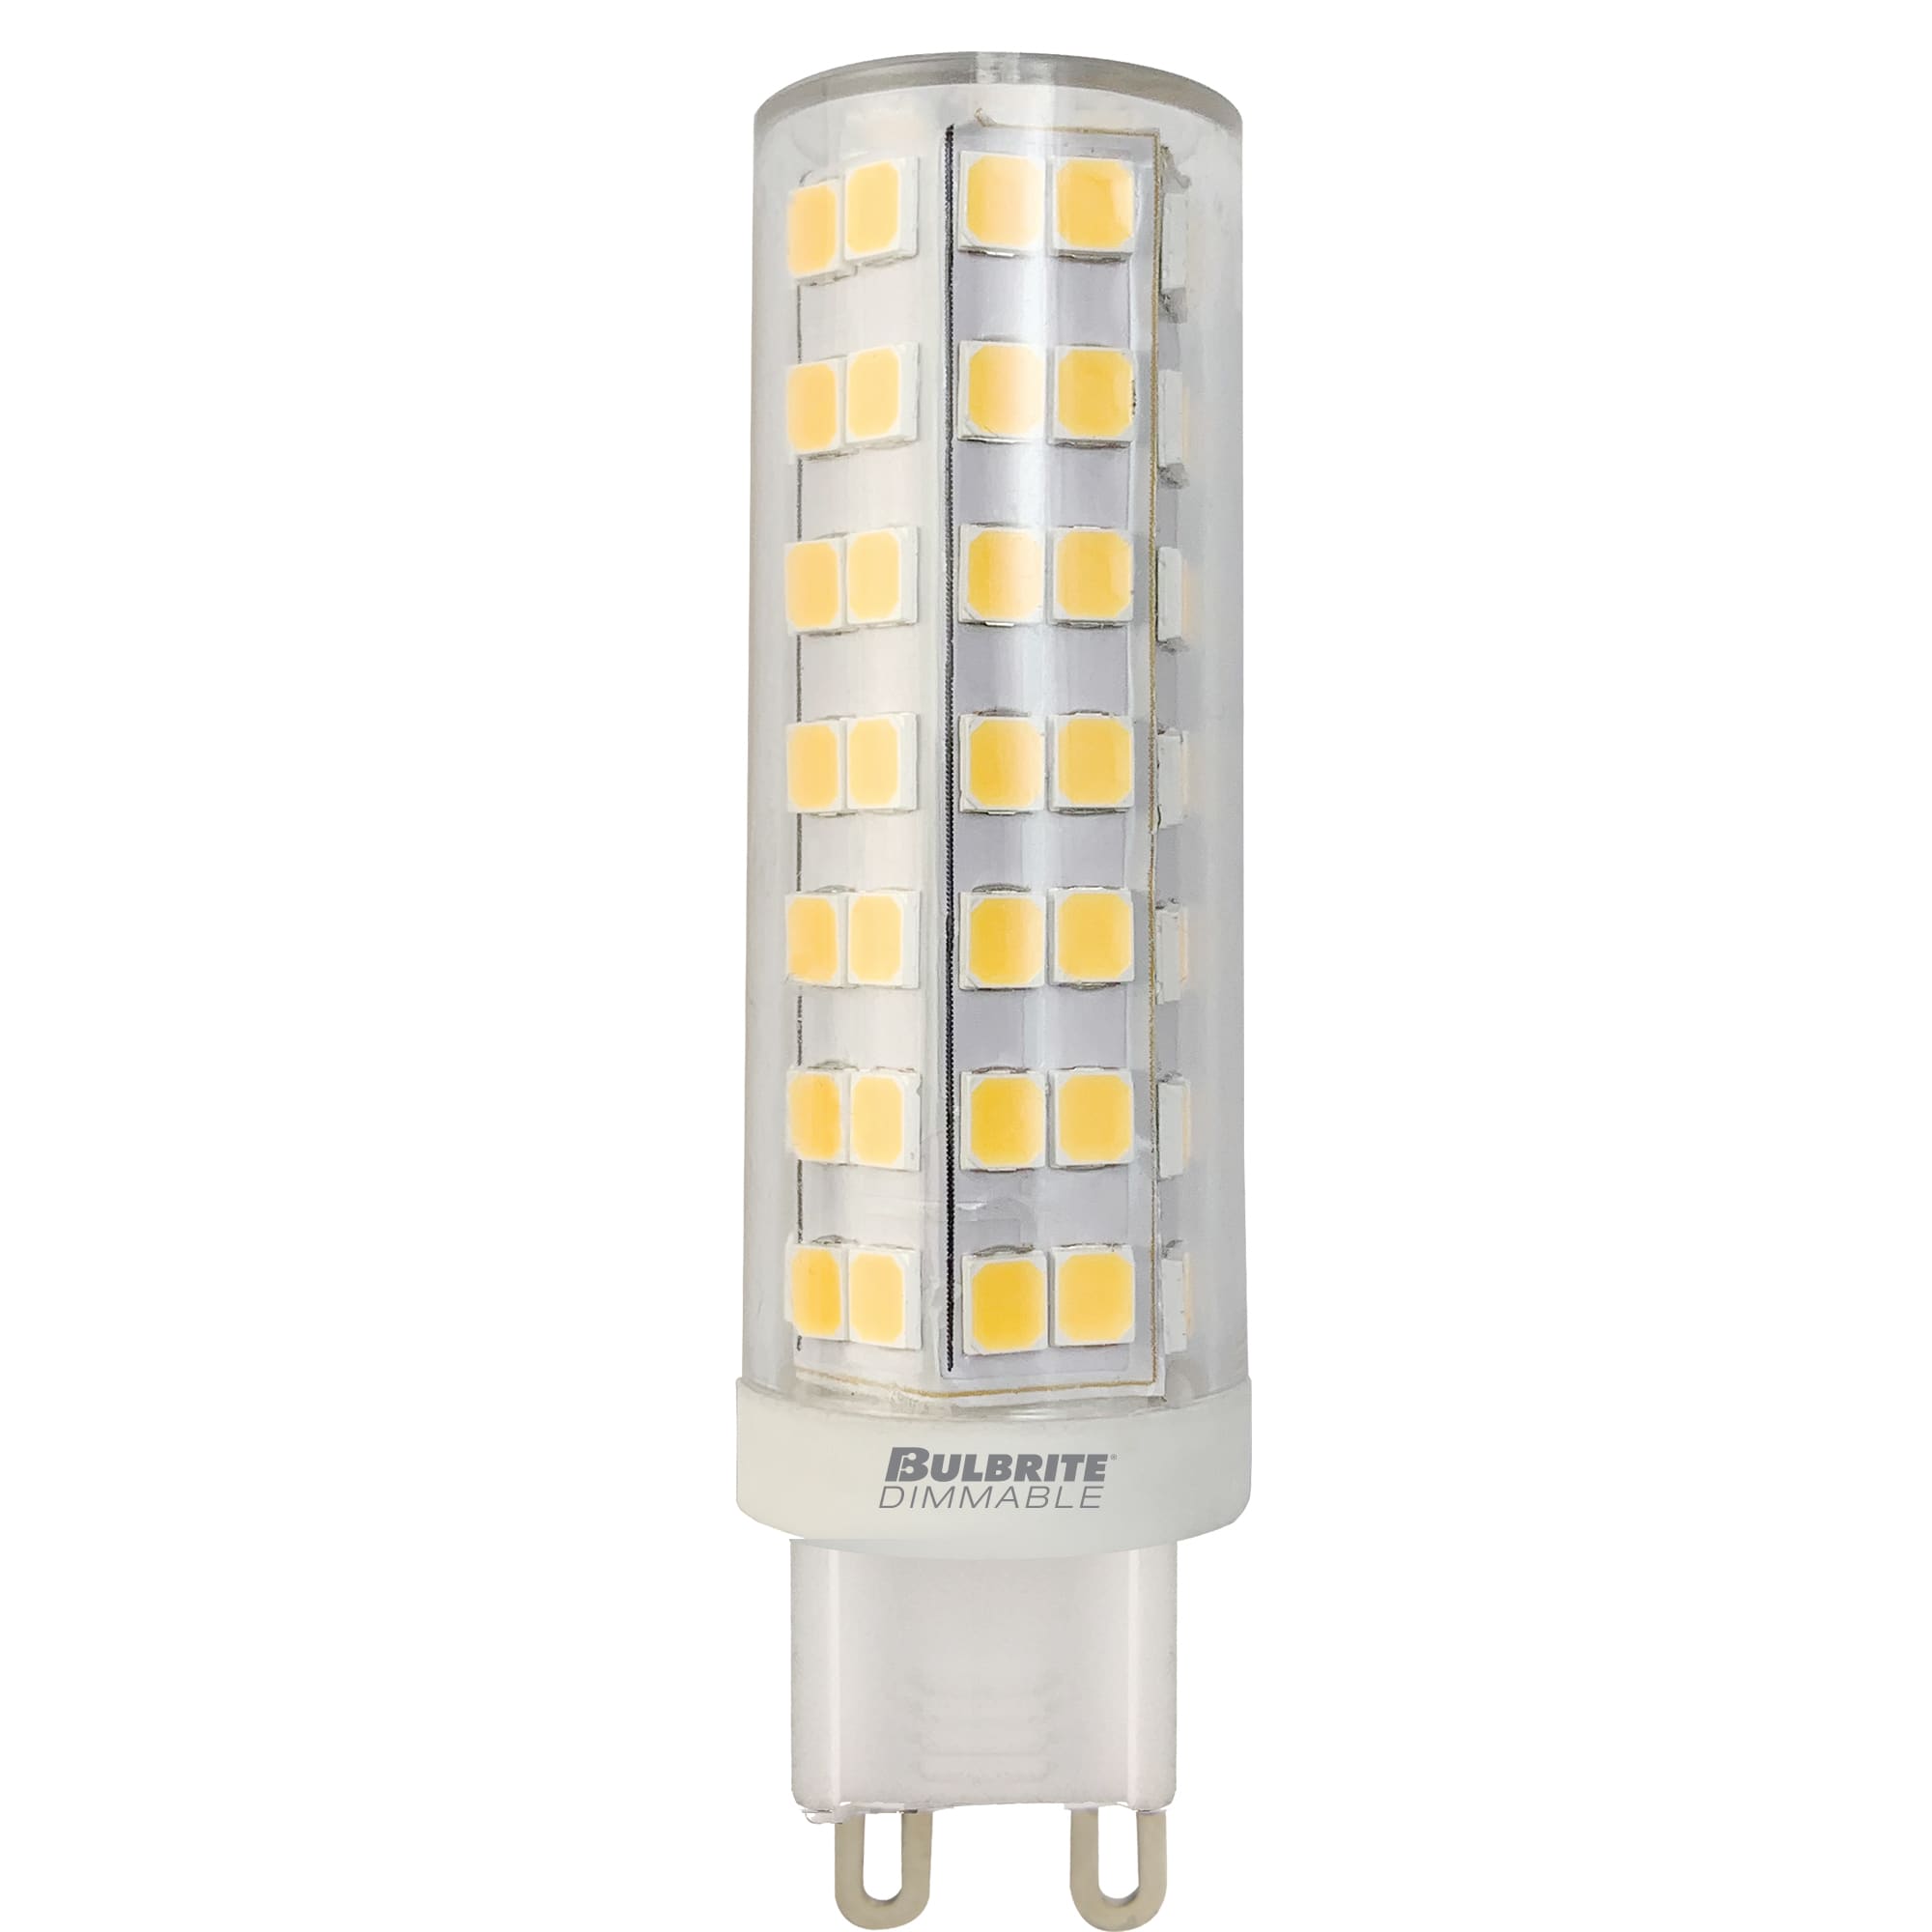 Bulbrite 862644 Clear Pack of 6.5 Dimmable T6 G9 LED Bulbs - 700 Lumens, and 80CRI - LightingDirect.com